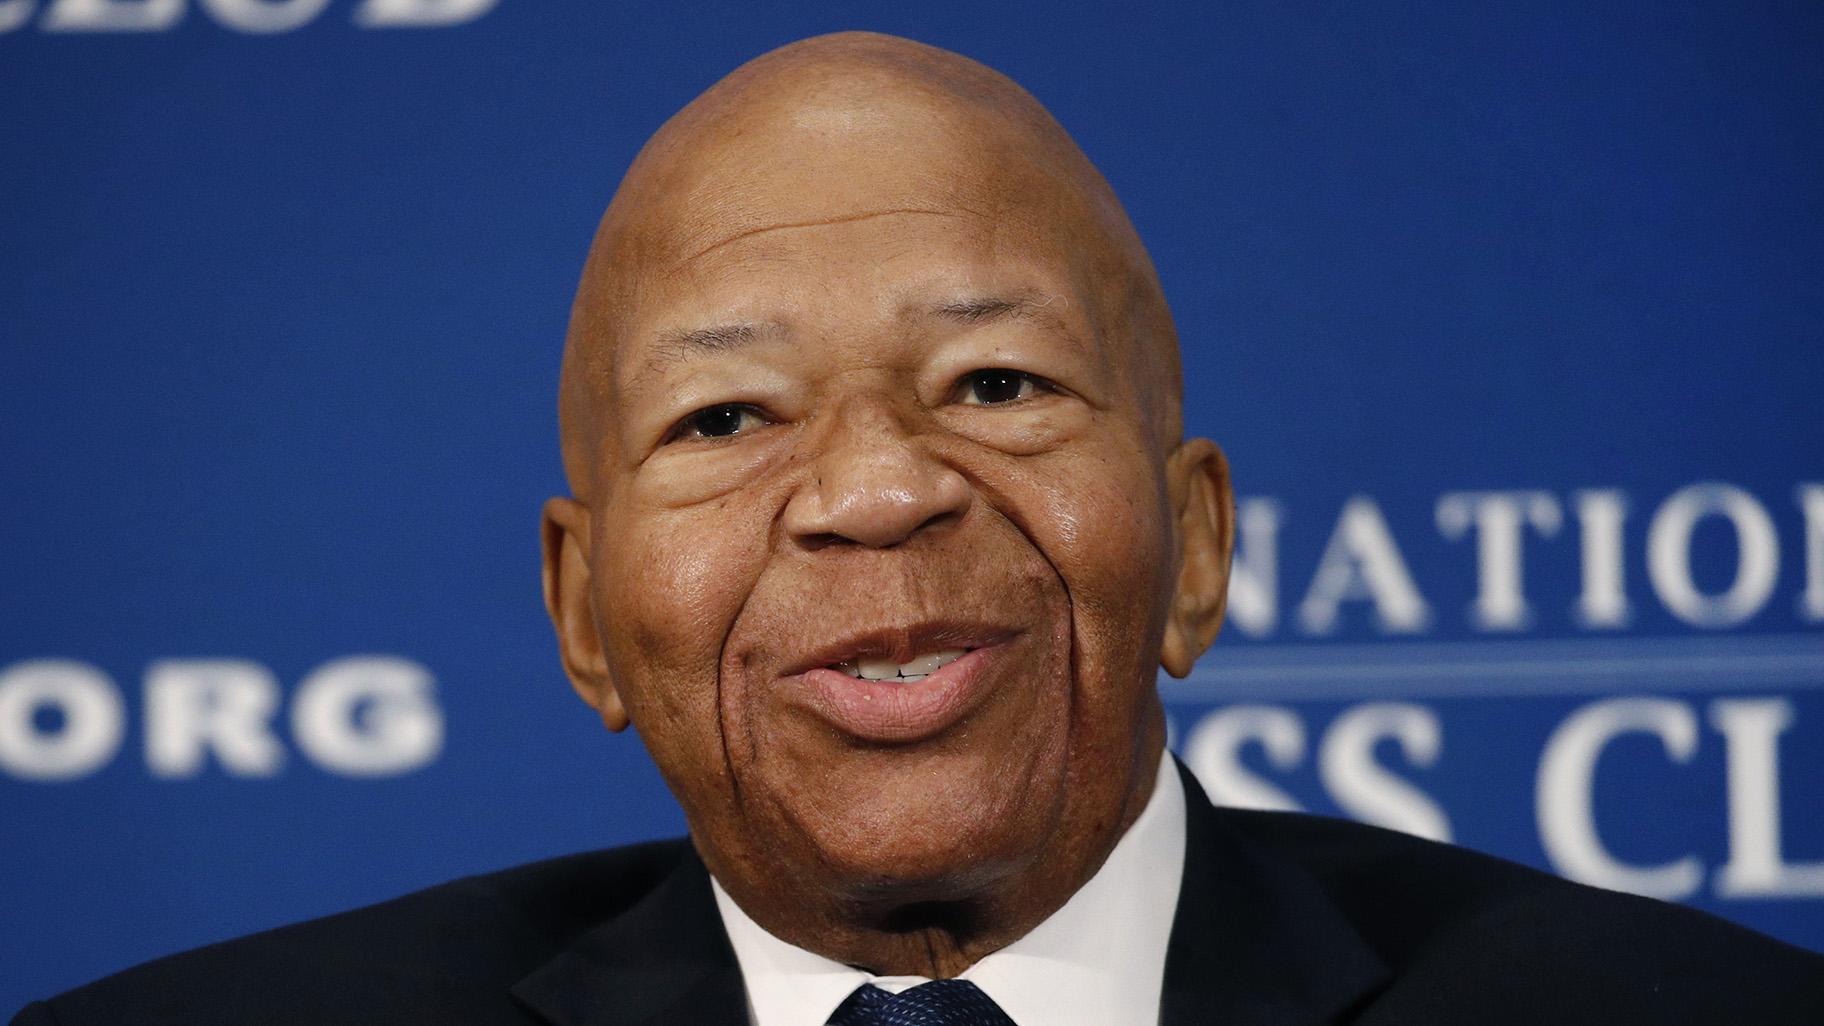 In this Aug. 7, 2019, file photo, Rep. Elijah Cummings, D-Md., speaks during a luncheon at the National Press Club in Washington. U.S. Rep. Cummings has died from complications of longtime health challenges, his office said in a statement on Oct. 17, 2019. (AP Photo / Patrick Semansky, File)